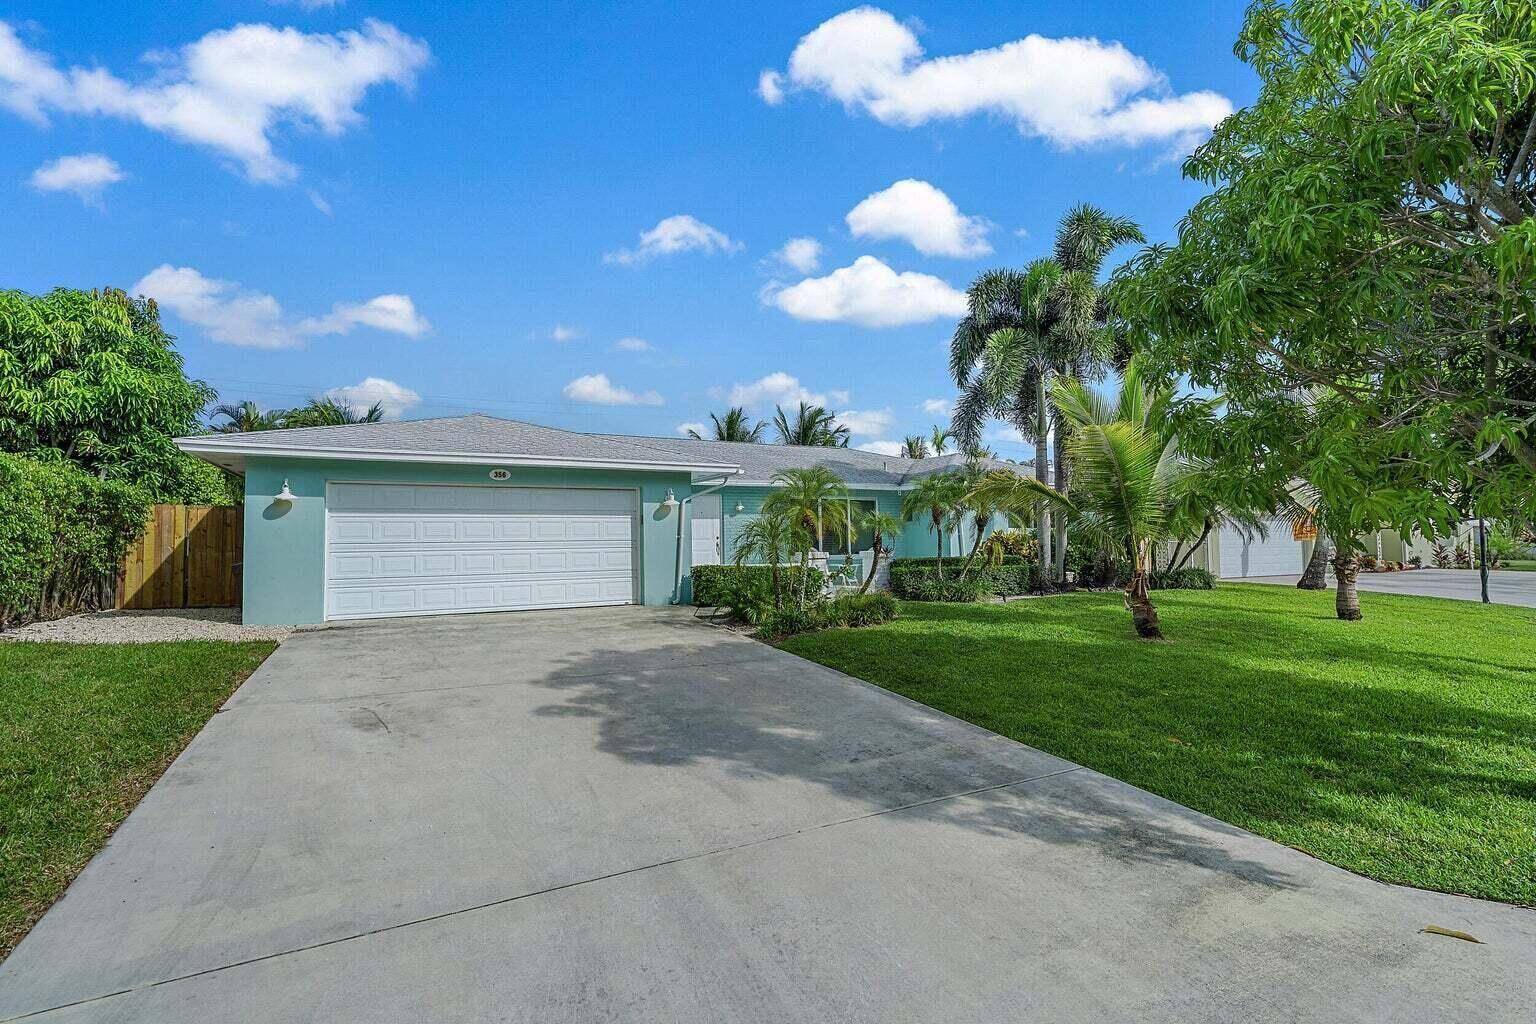 Rental in the Village of Tequesta, This 3 bedroom, 3 bath home is the tropical escape you have been searching for !